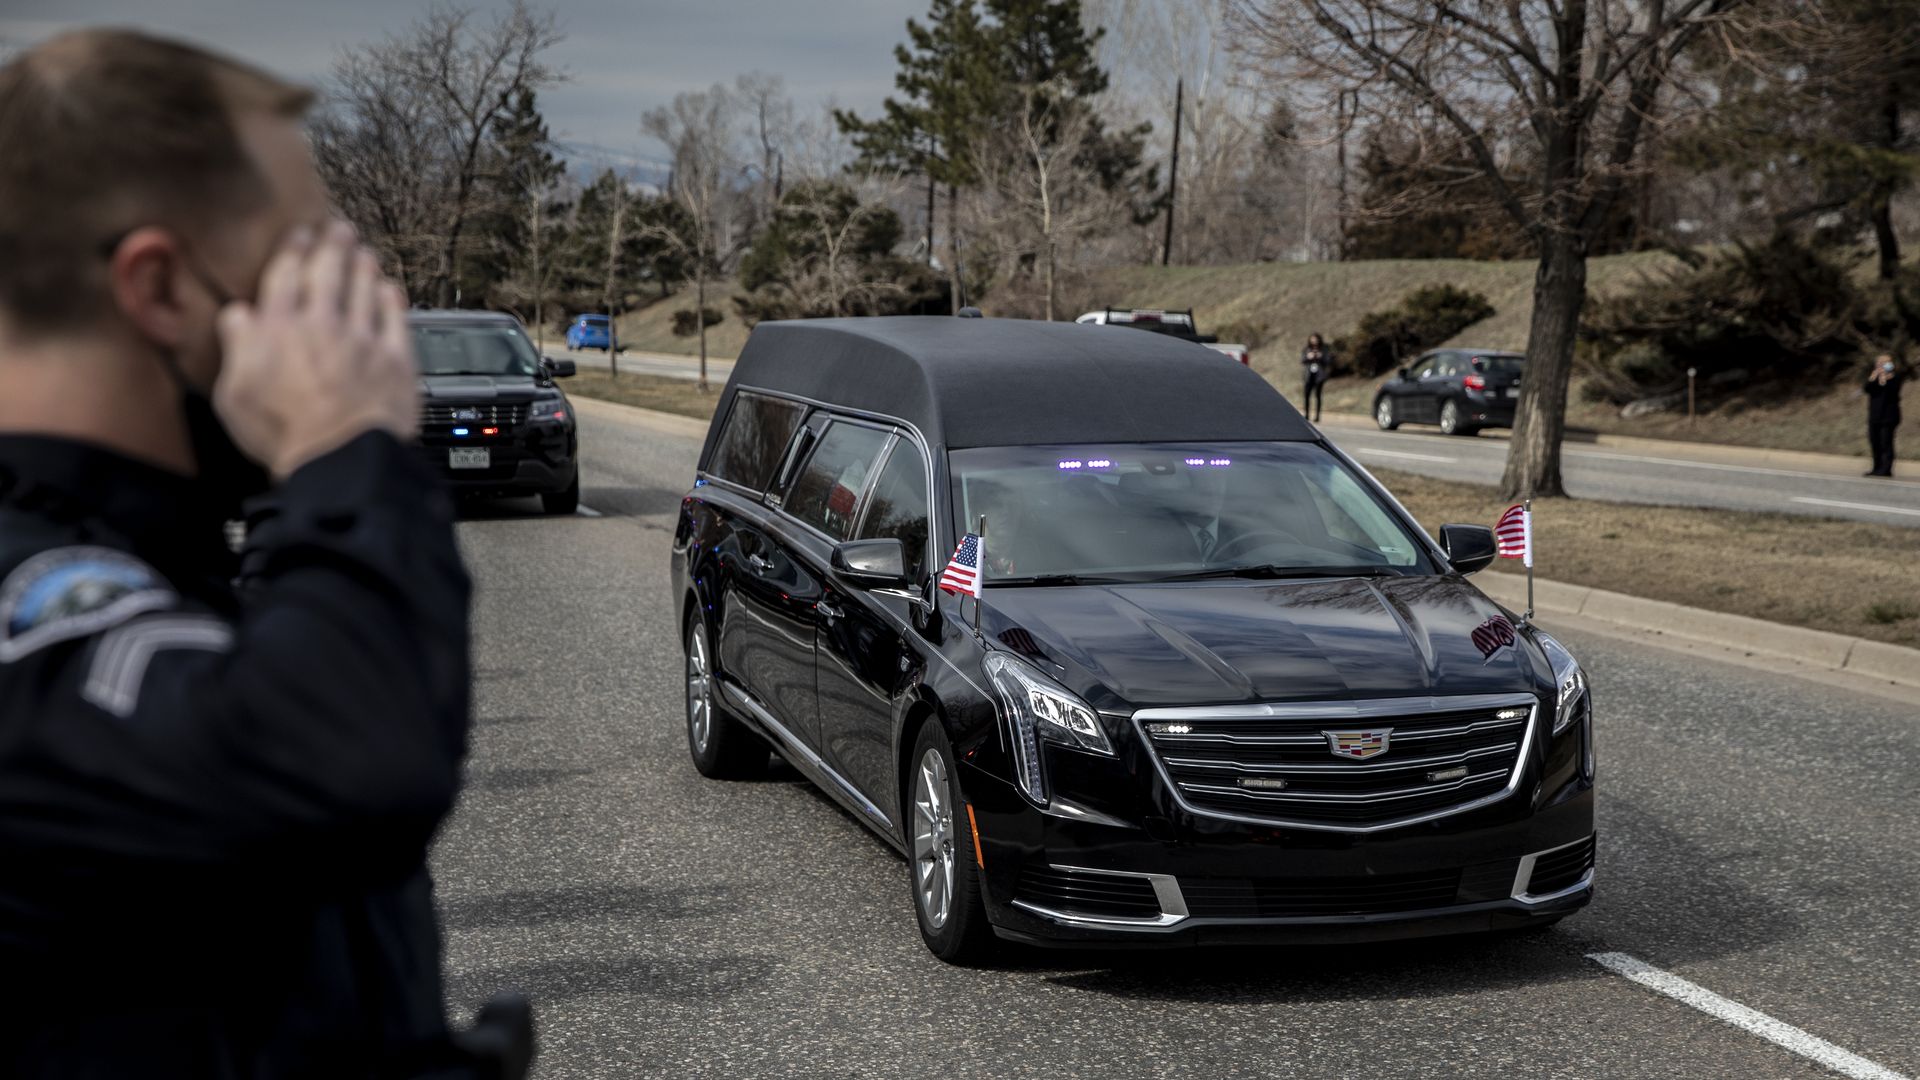 A police officer is seen saluting the hearse carrying the body of slain Boulder Police Officer Eric Talley.